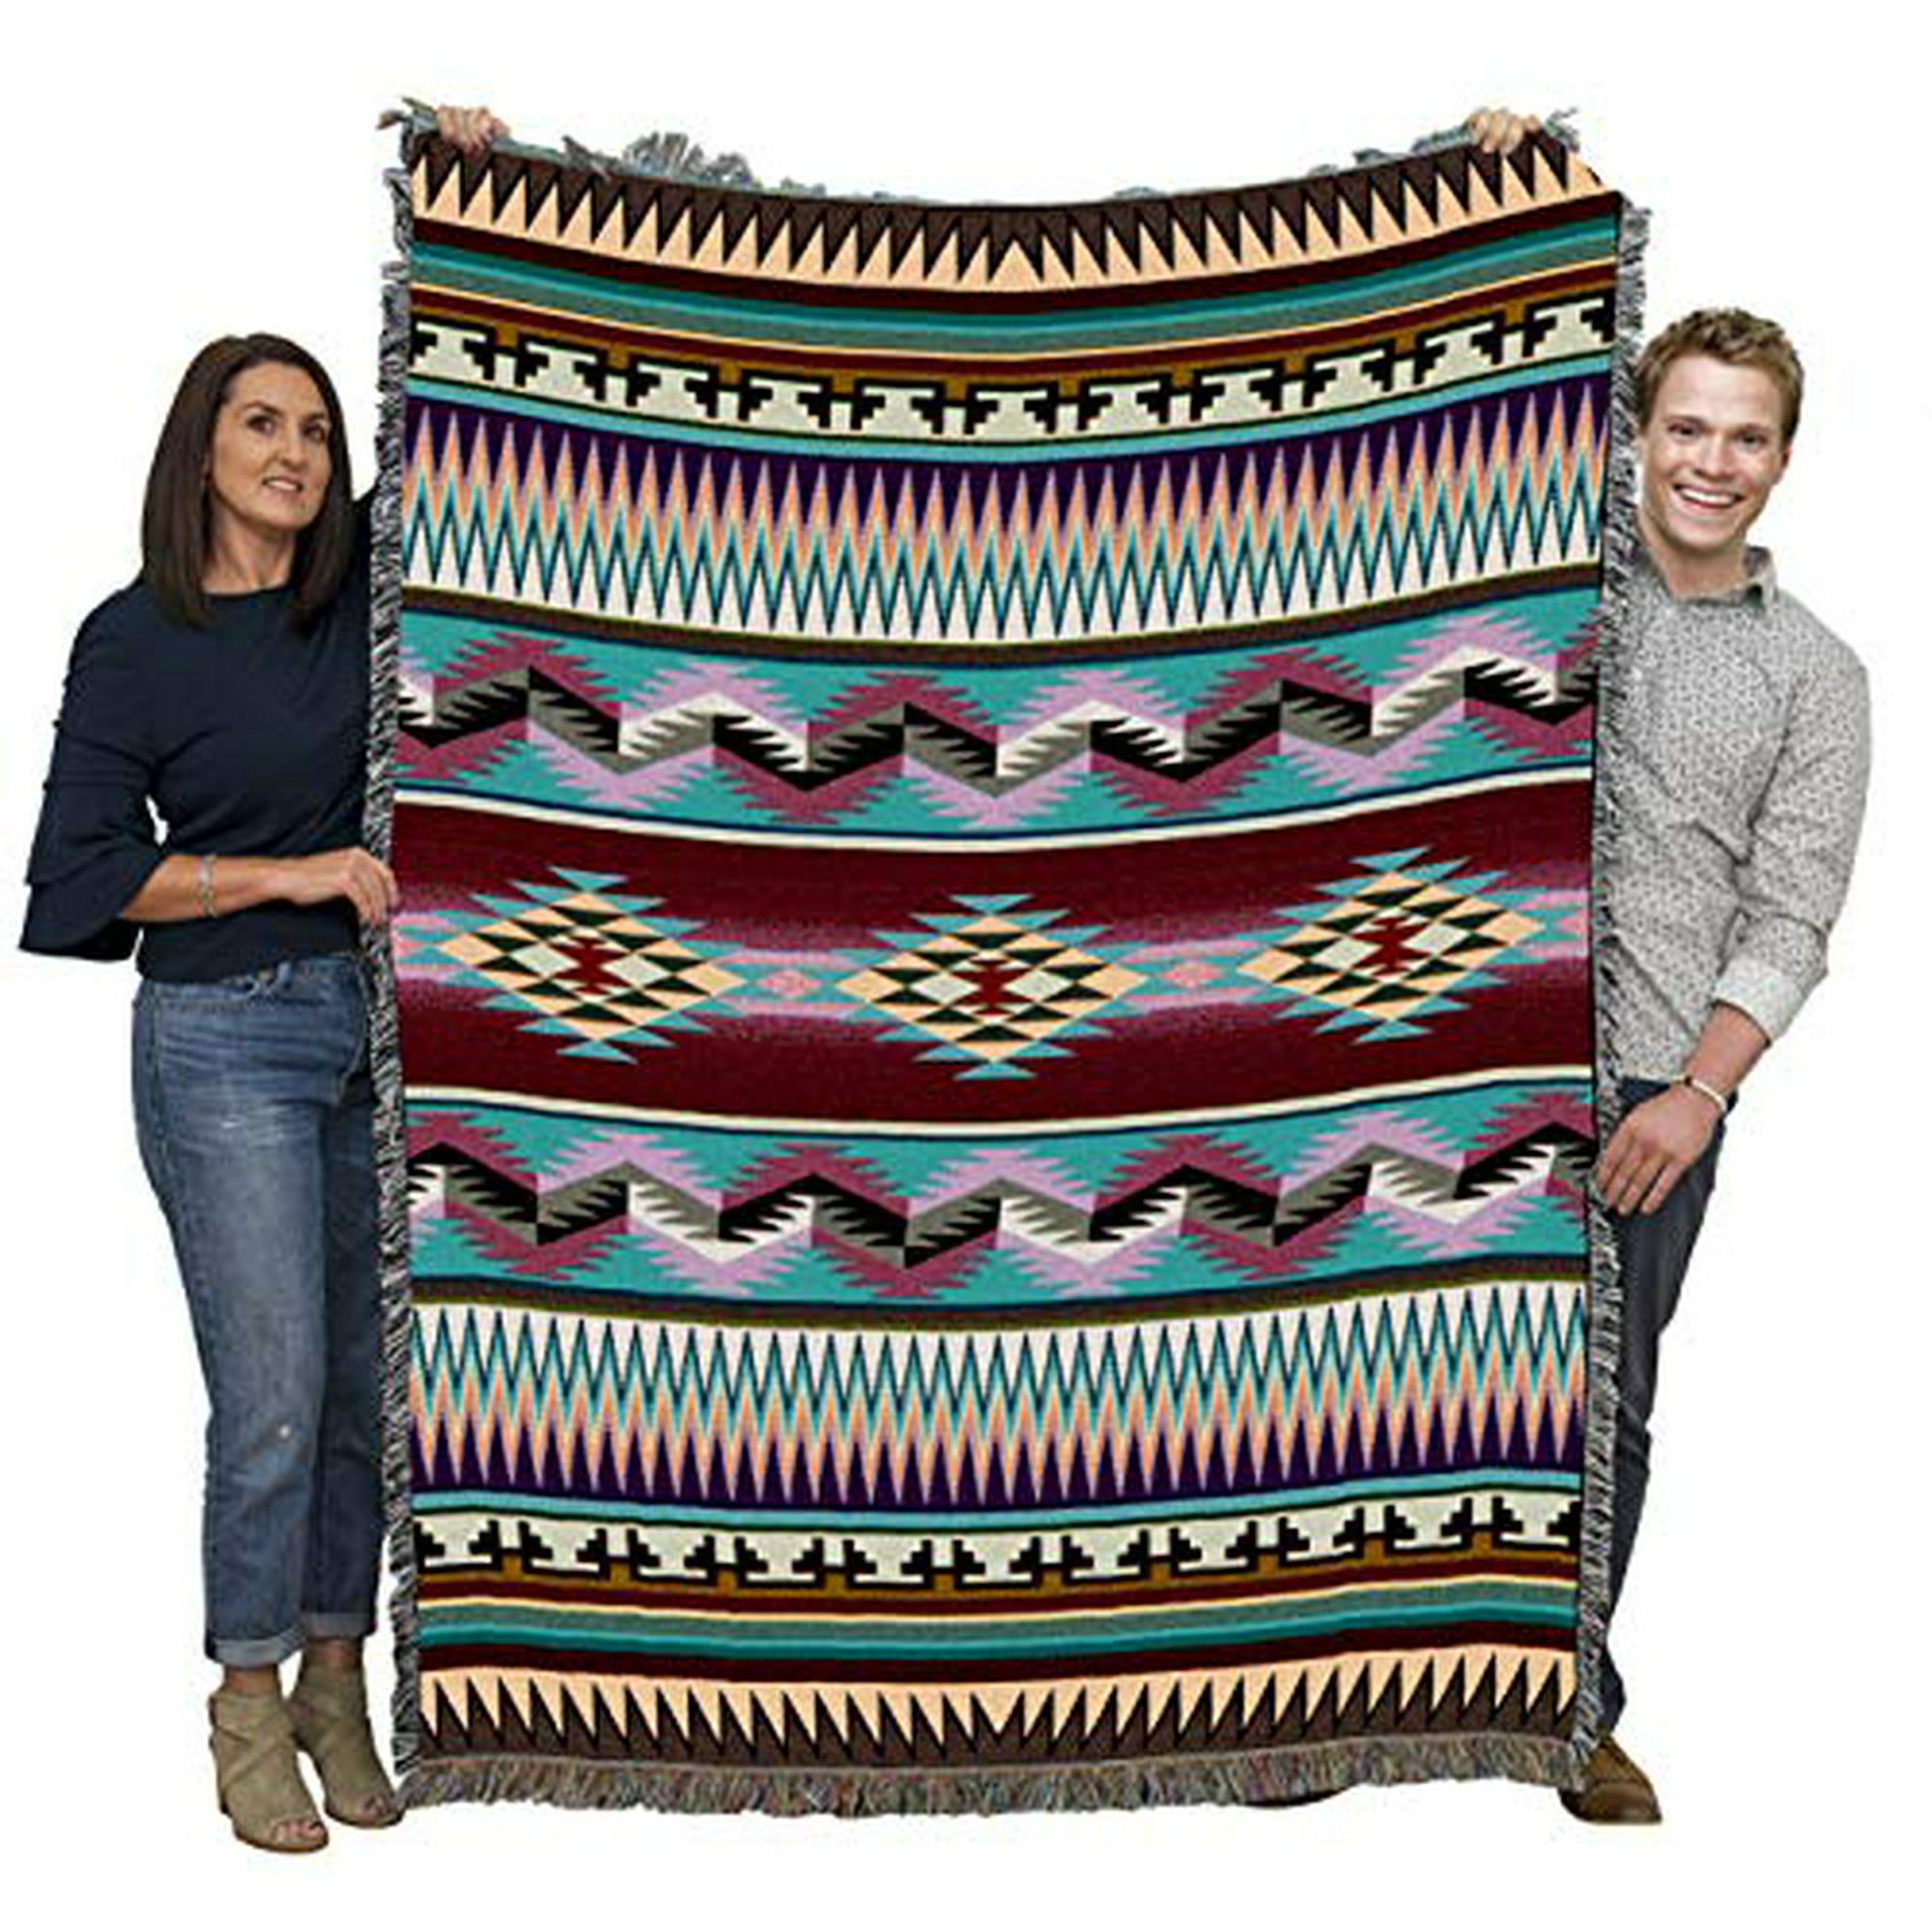 Pure Country Weavers Southwest Desert Stripe Geometric Woven Tapestry Throw Blanket With Fringe Cotton Made In The USA Size 72 X 54 Walmart Canada